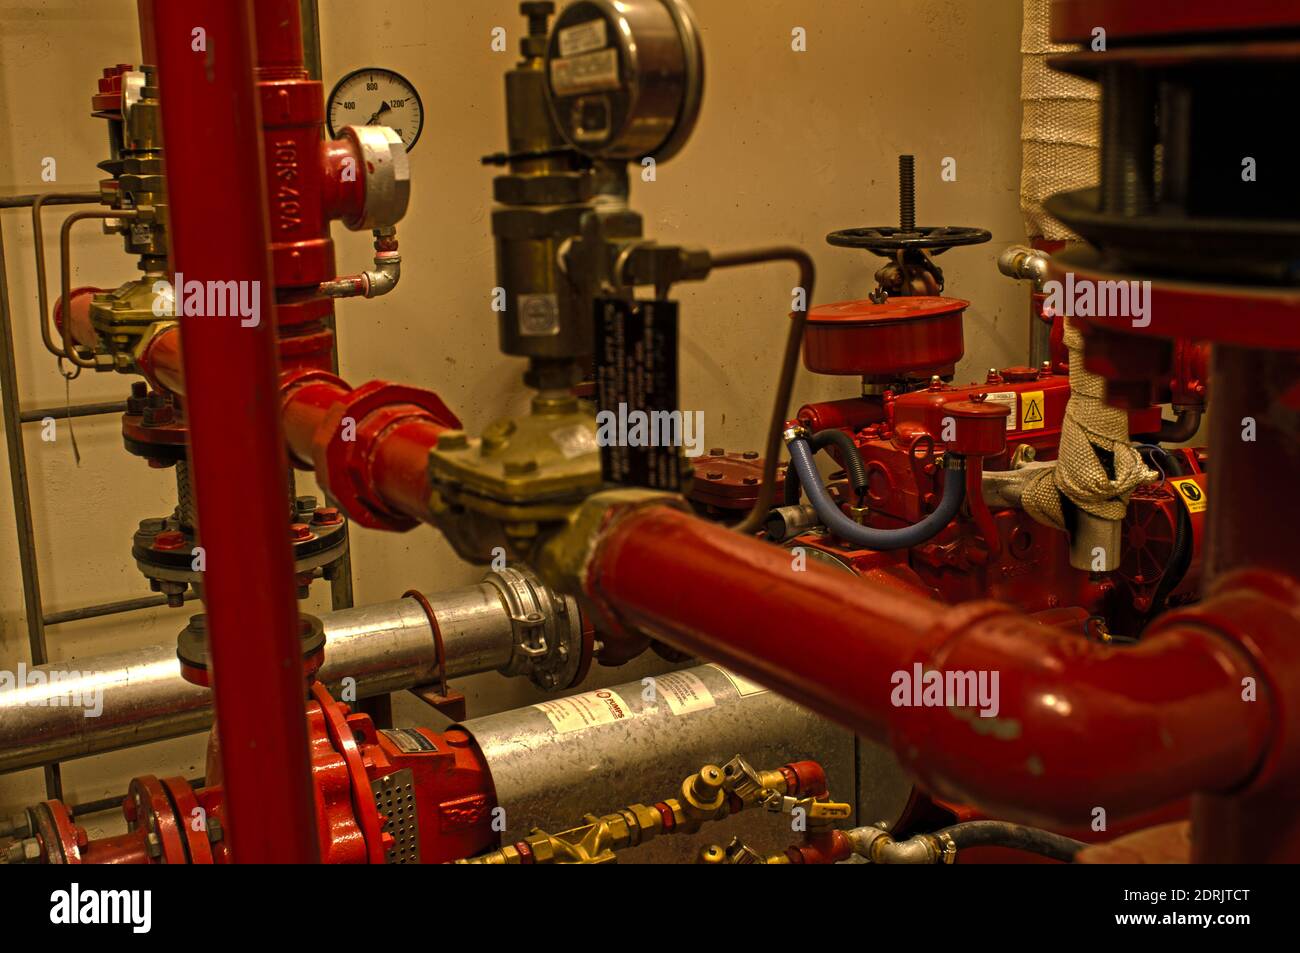 Refurbished fire sprinkler system (c.2010's) located in a decaying top/roof floor plant room of an old, 25+ story city building (c.1970's). Stock Photo